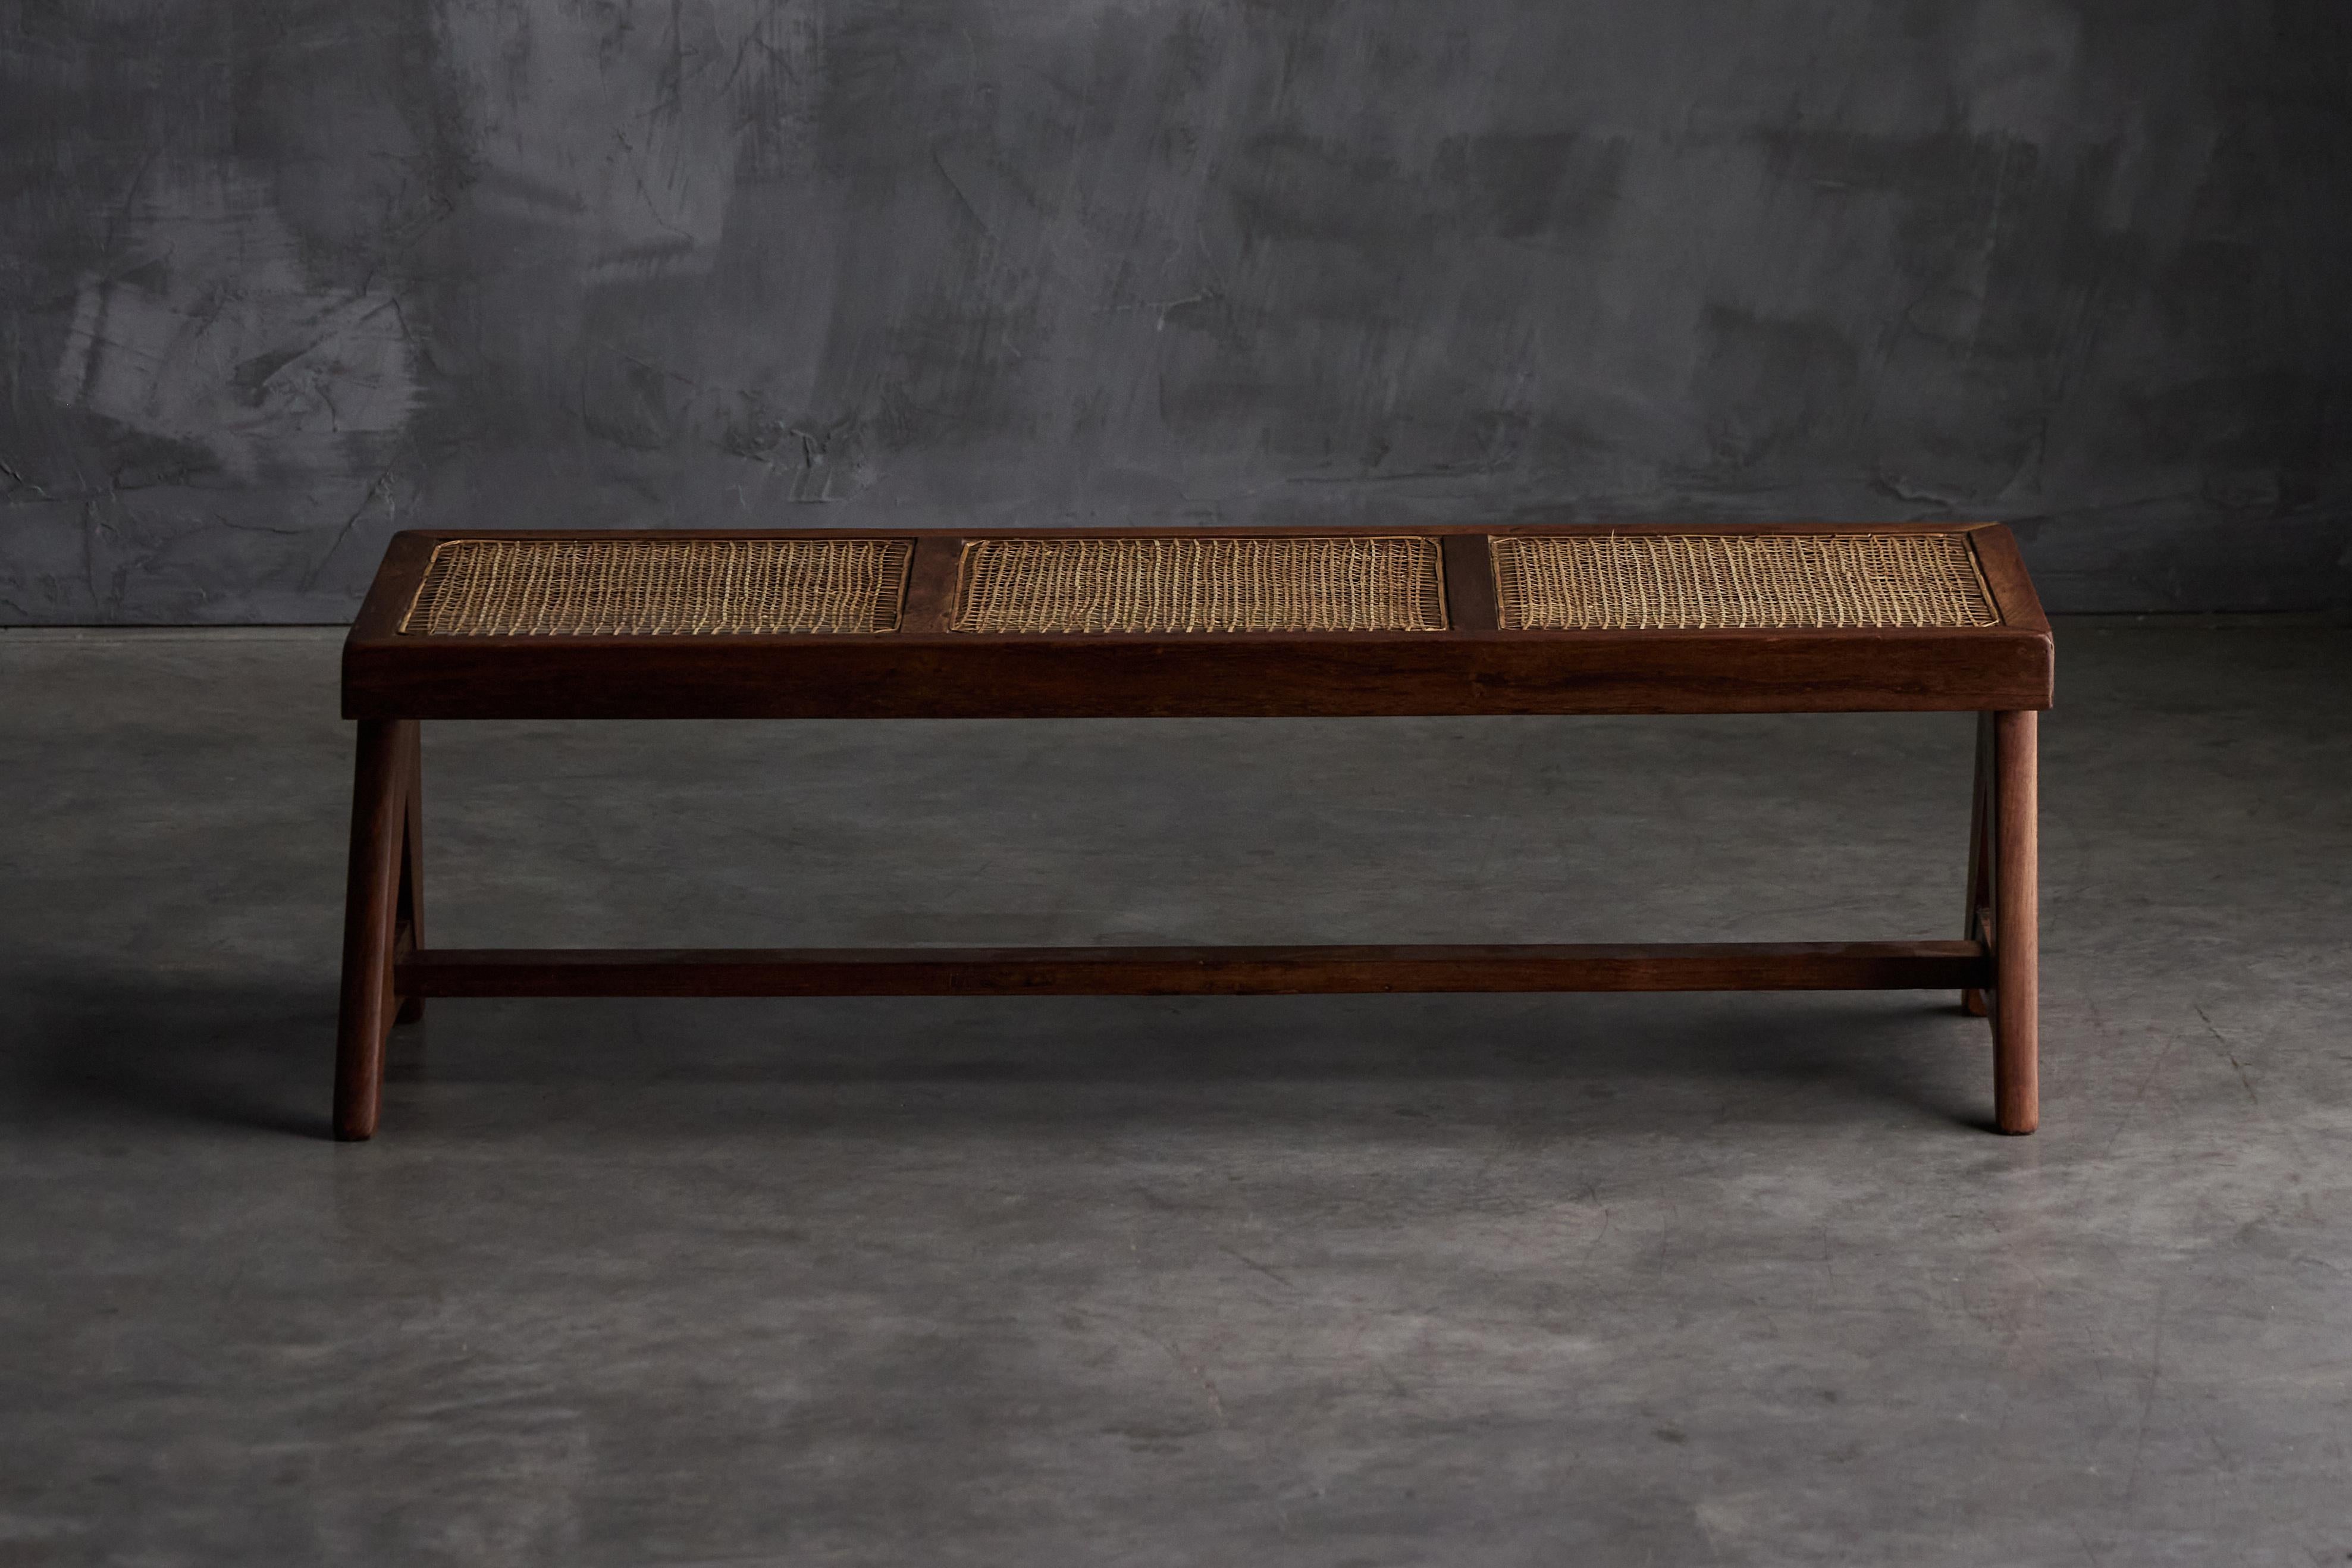 Indian Teak Bench PJ-SI-33B by Pierre Jeanneret, India, 1950s For Sale